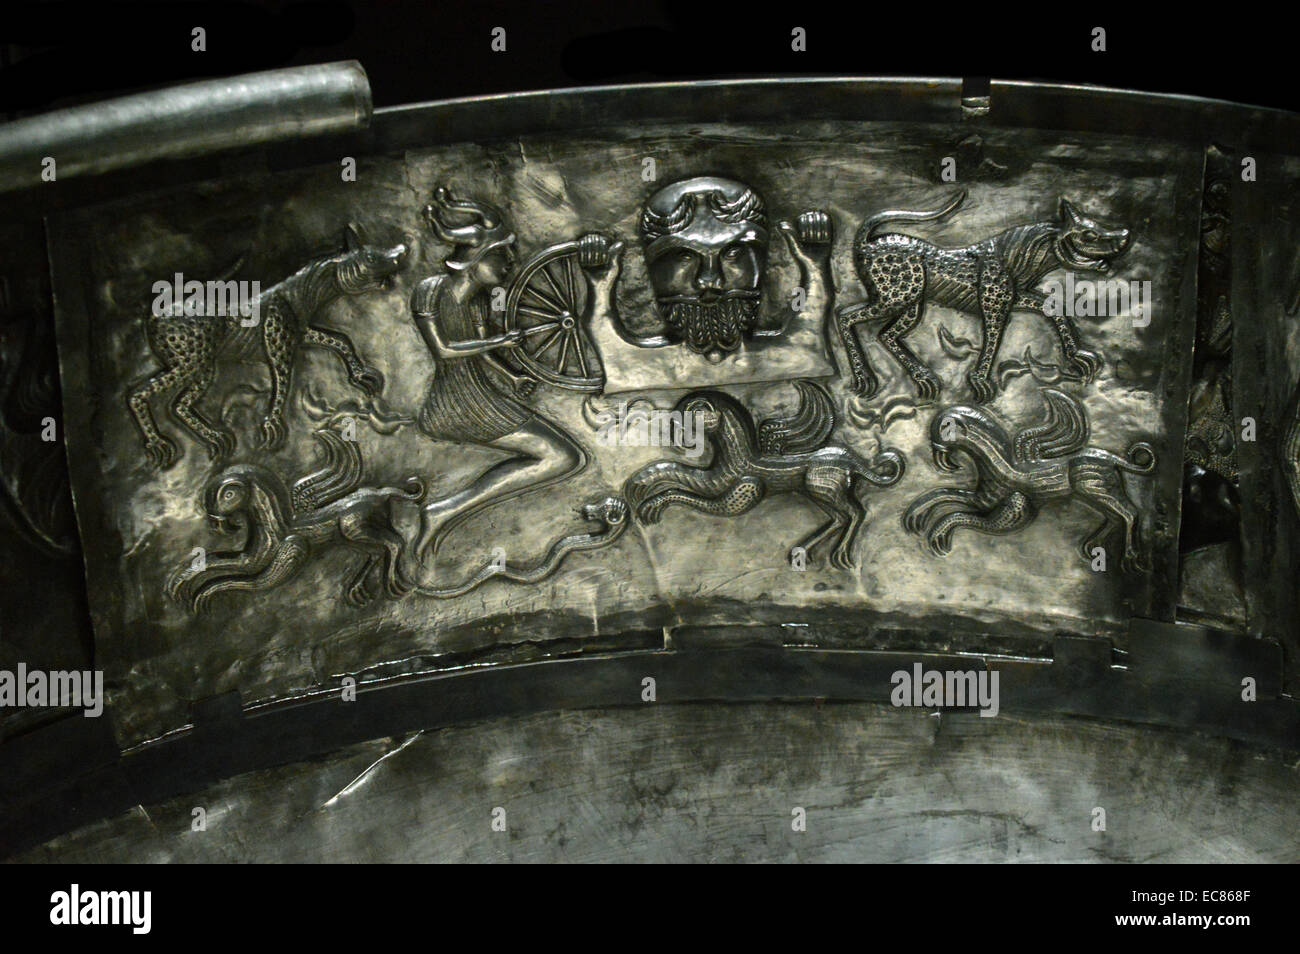 The Gundestrup cauldron is a richly decorated silver vessel; thought to date between 200 BC and 300 AD; placing it within the late La Tène period or early Roman Iron Age. The cauldron is the largest known example of European Iron Age silver work. It was found in 1891 in a peat bog near the hamlet of Gundestrup in the Aars parish of Himmerland; Denmark Stock Photo